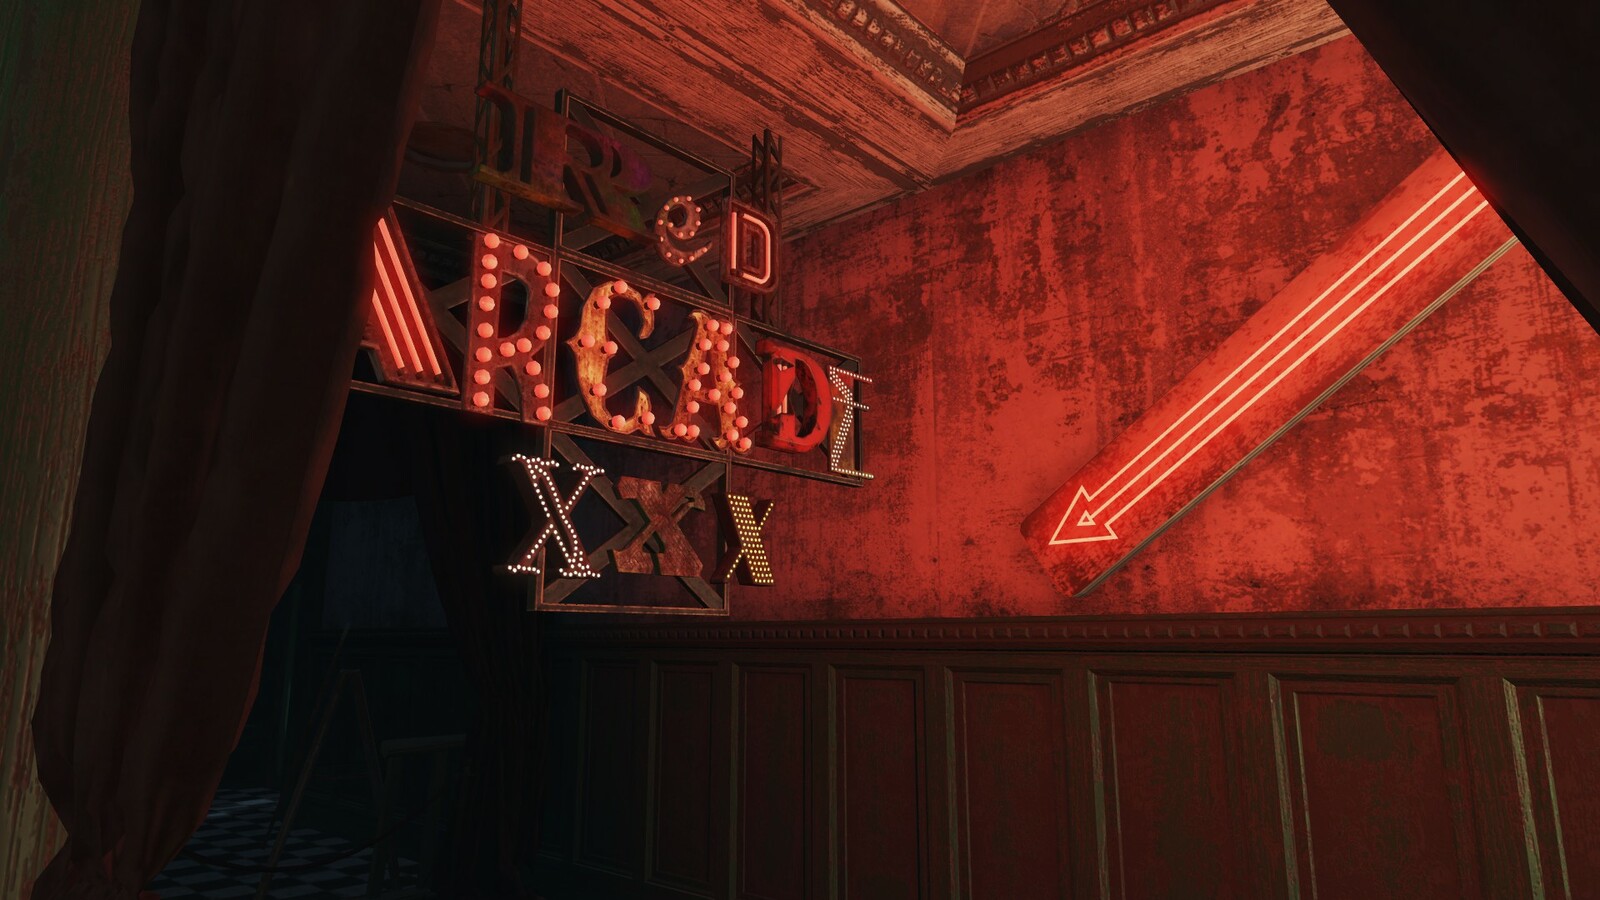 Red Arcade Sign, all of the signs were modeled in Blender and textured in Substance Painter